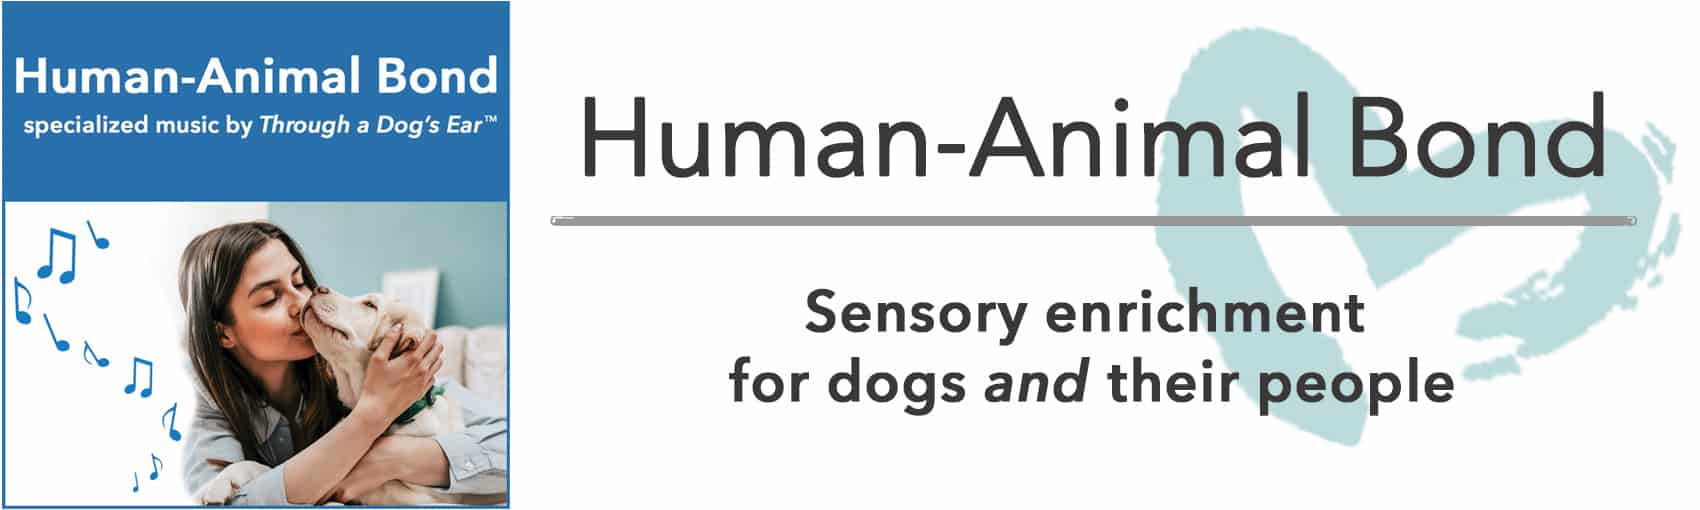 Music for the human-animal-bond brings sensory enrichment for pets and people